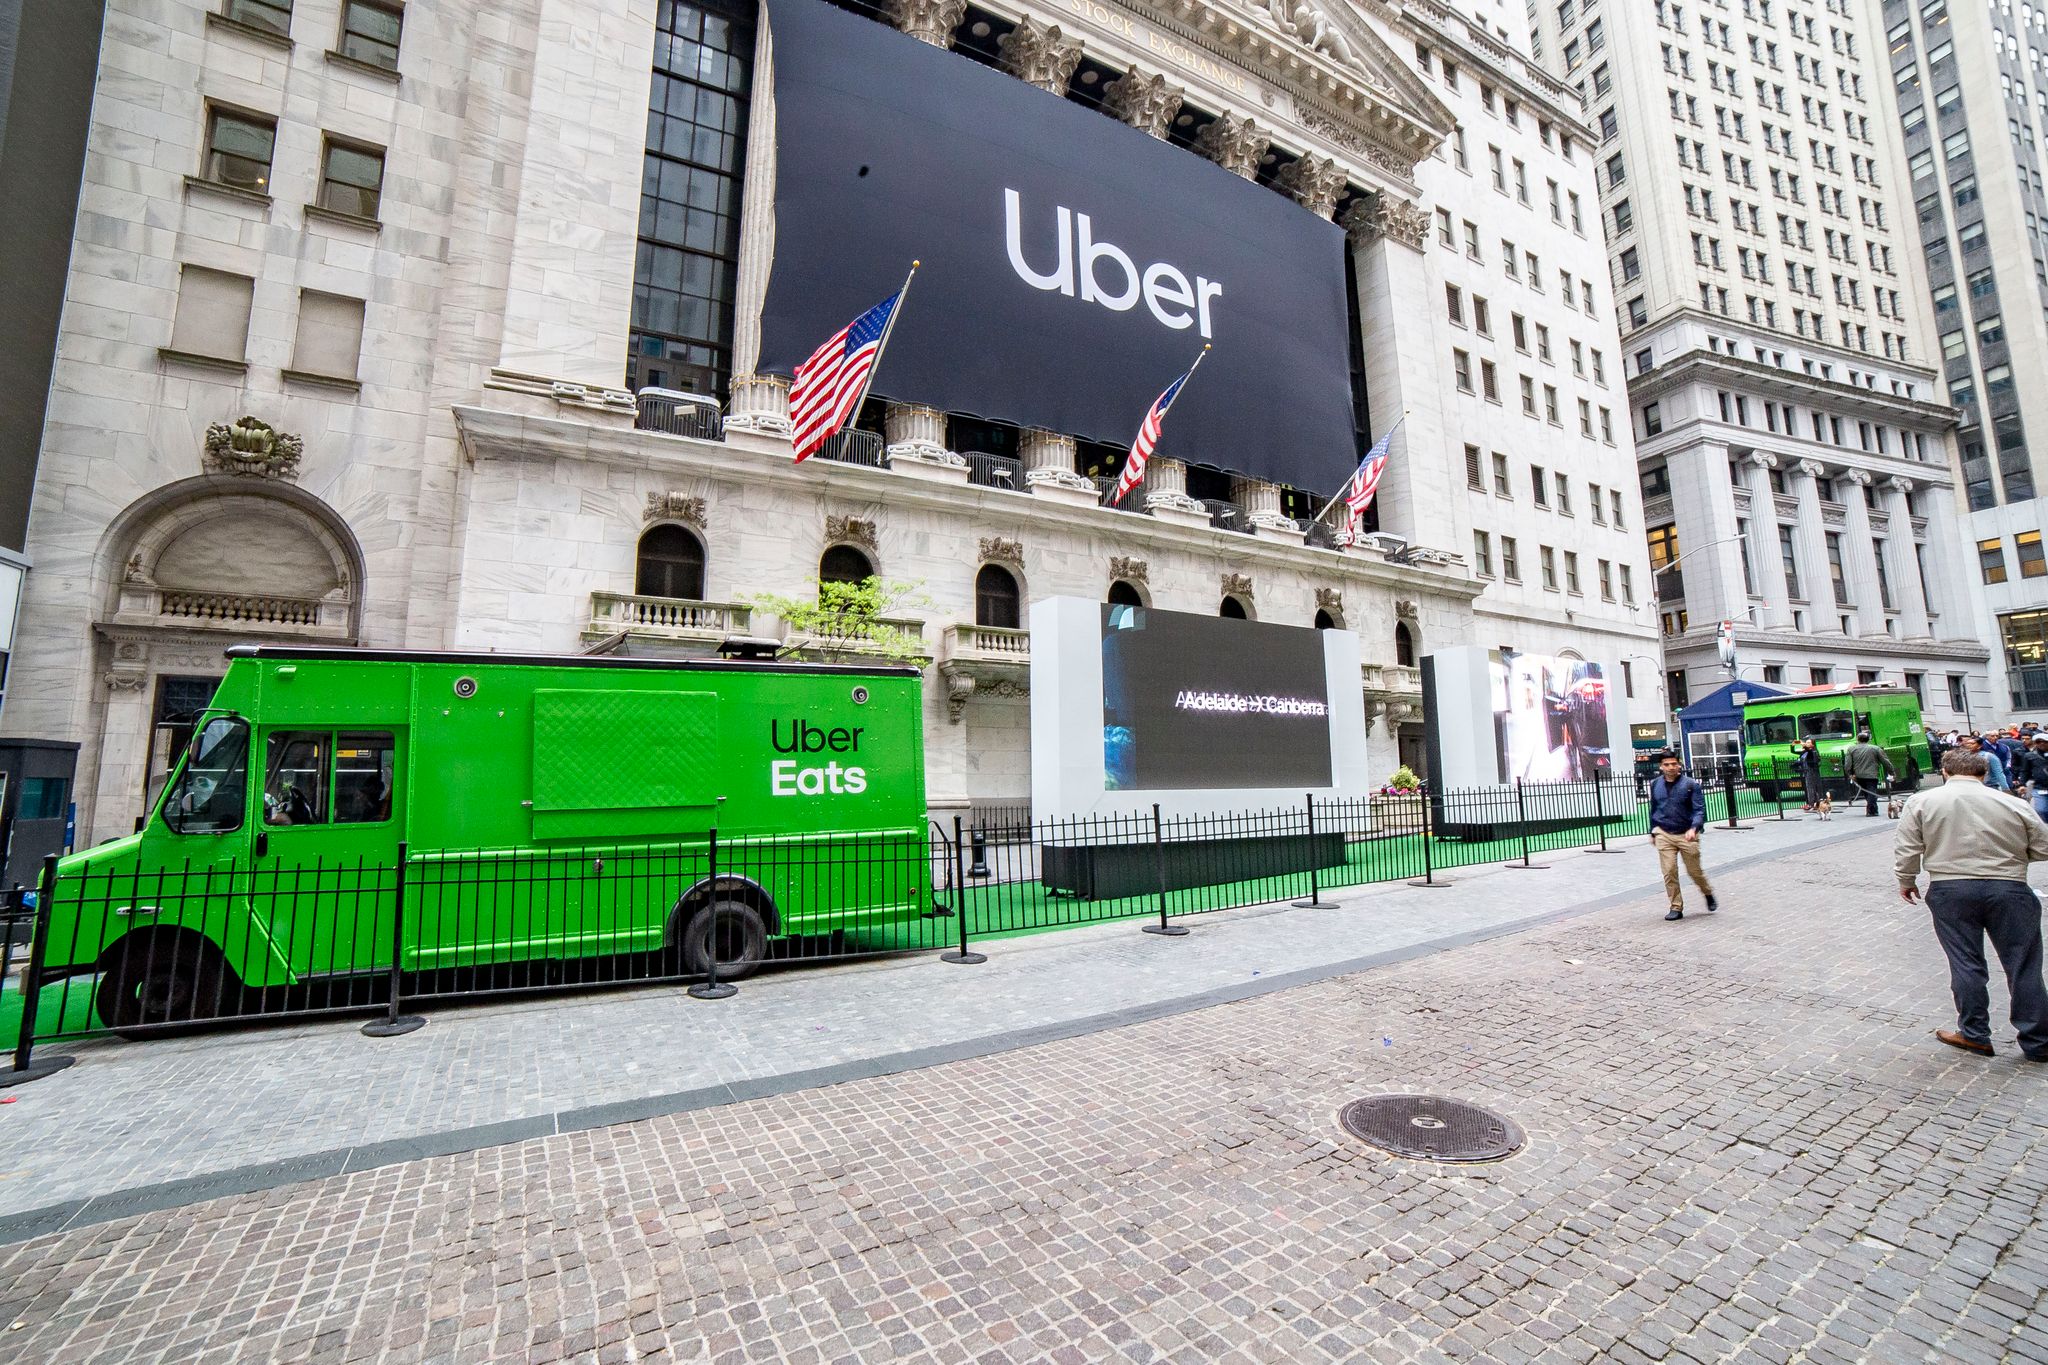 Uber Eats Food Truck At The New York Stock Exchange